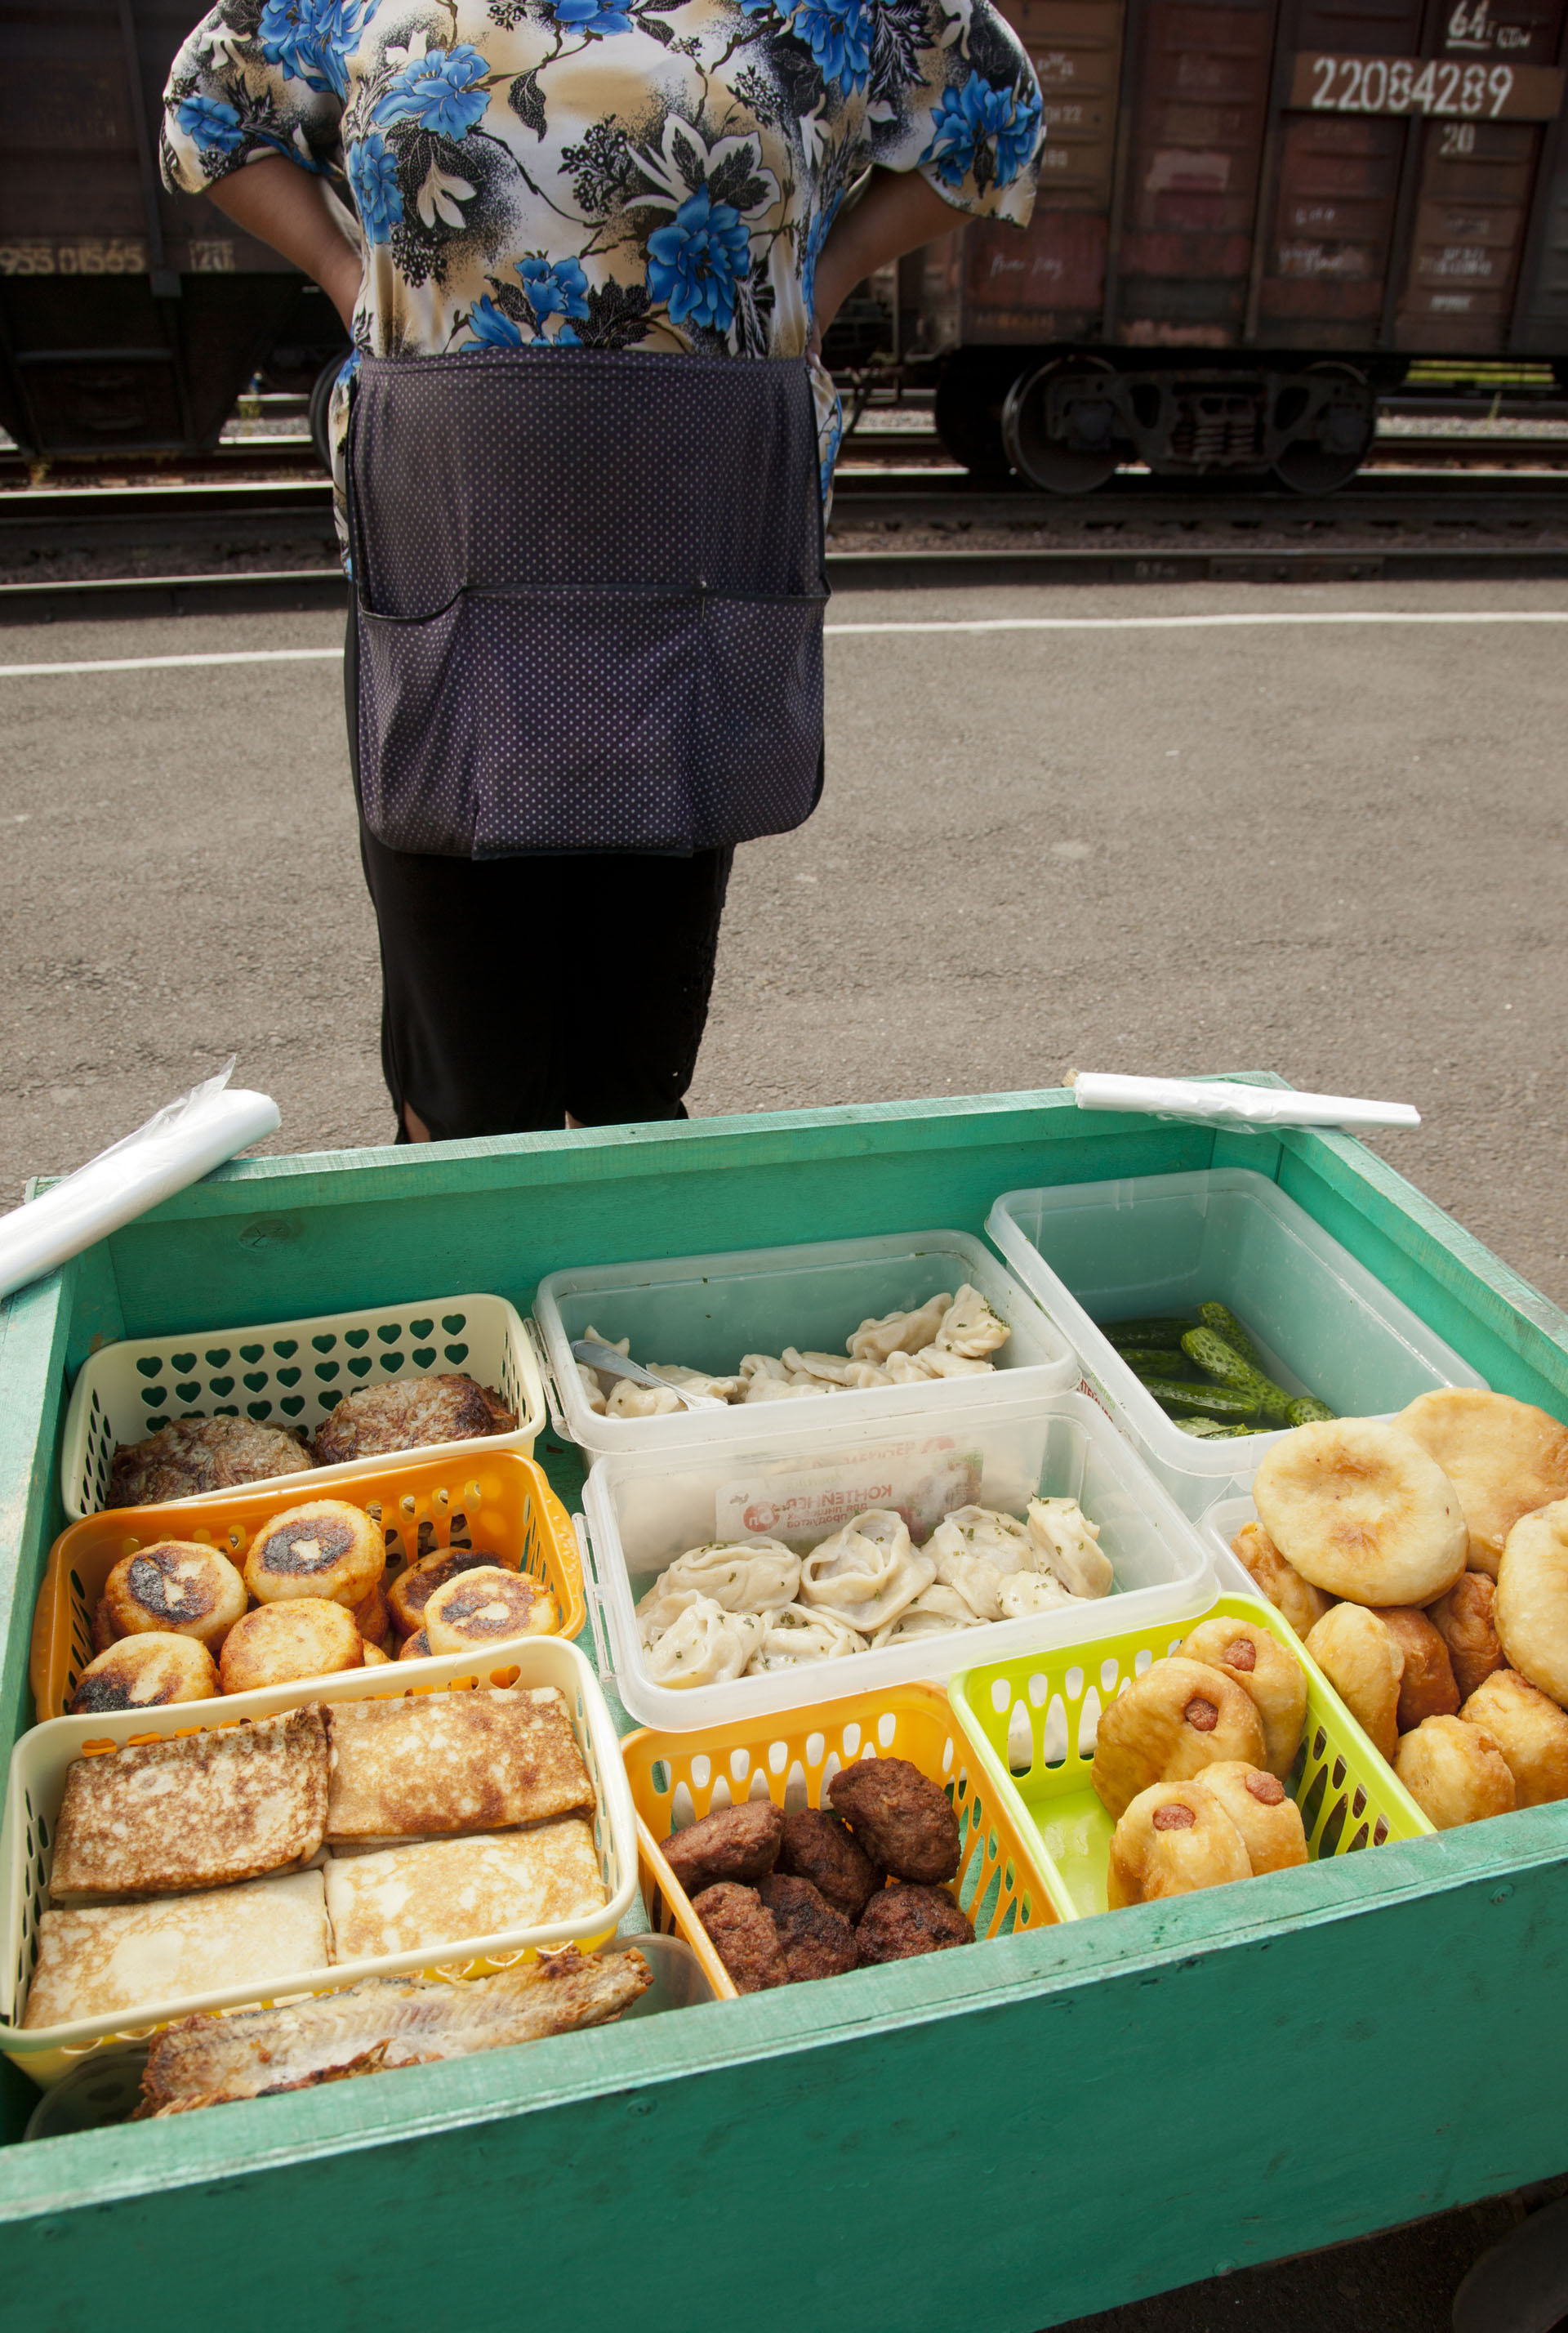 Families make full incomes and grandmothers supplement their pensions by selling hot homemade goods to travellers on the Trans-Siberian railway no matter the time of day